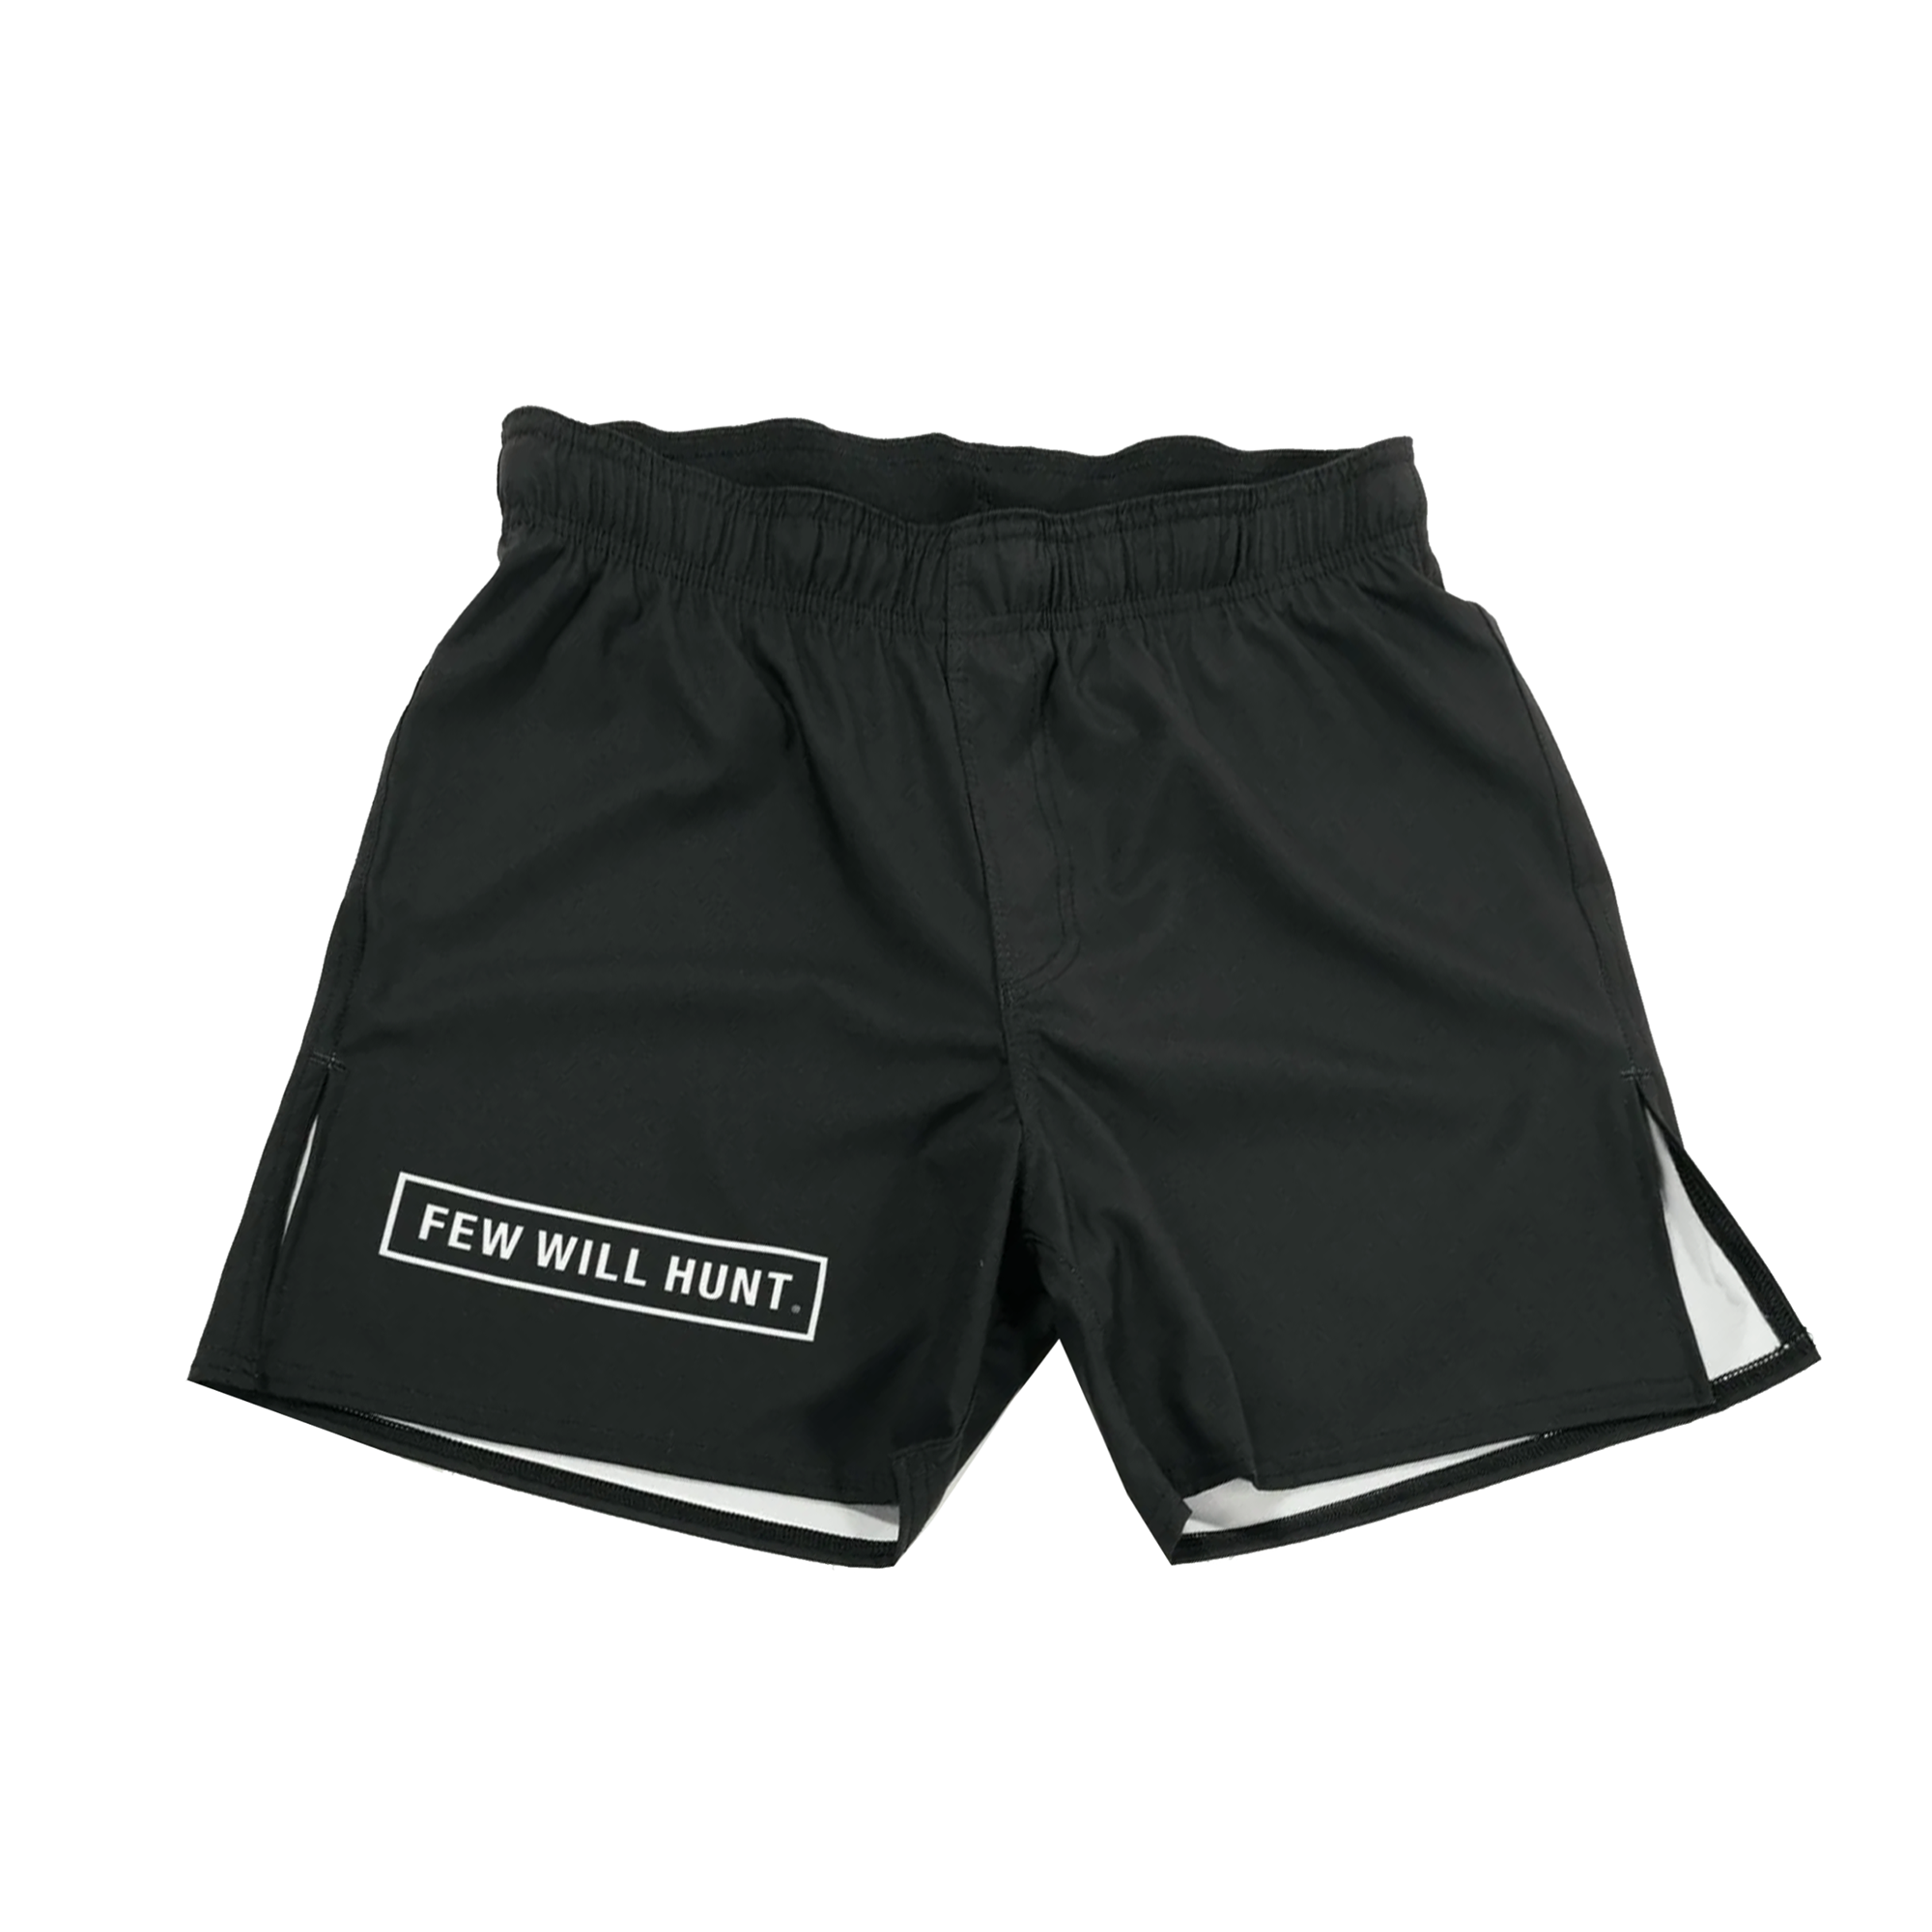 Competition Cross Combat Shorts